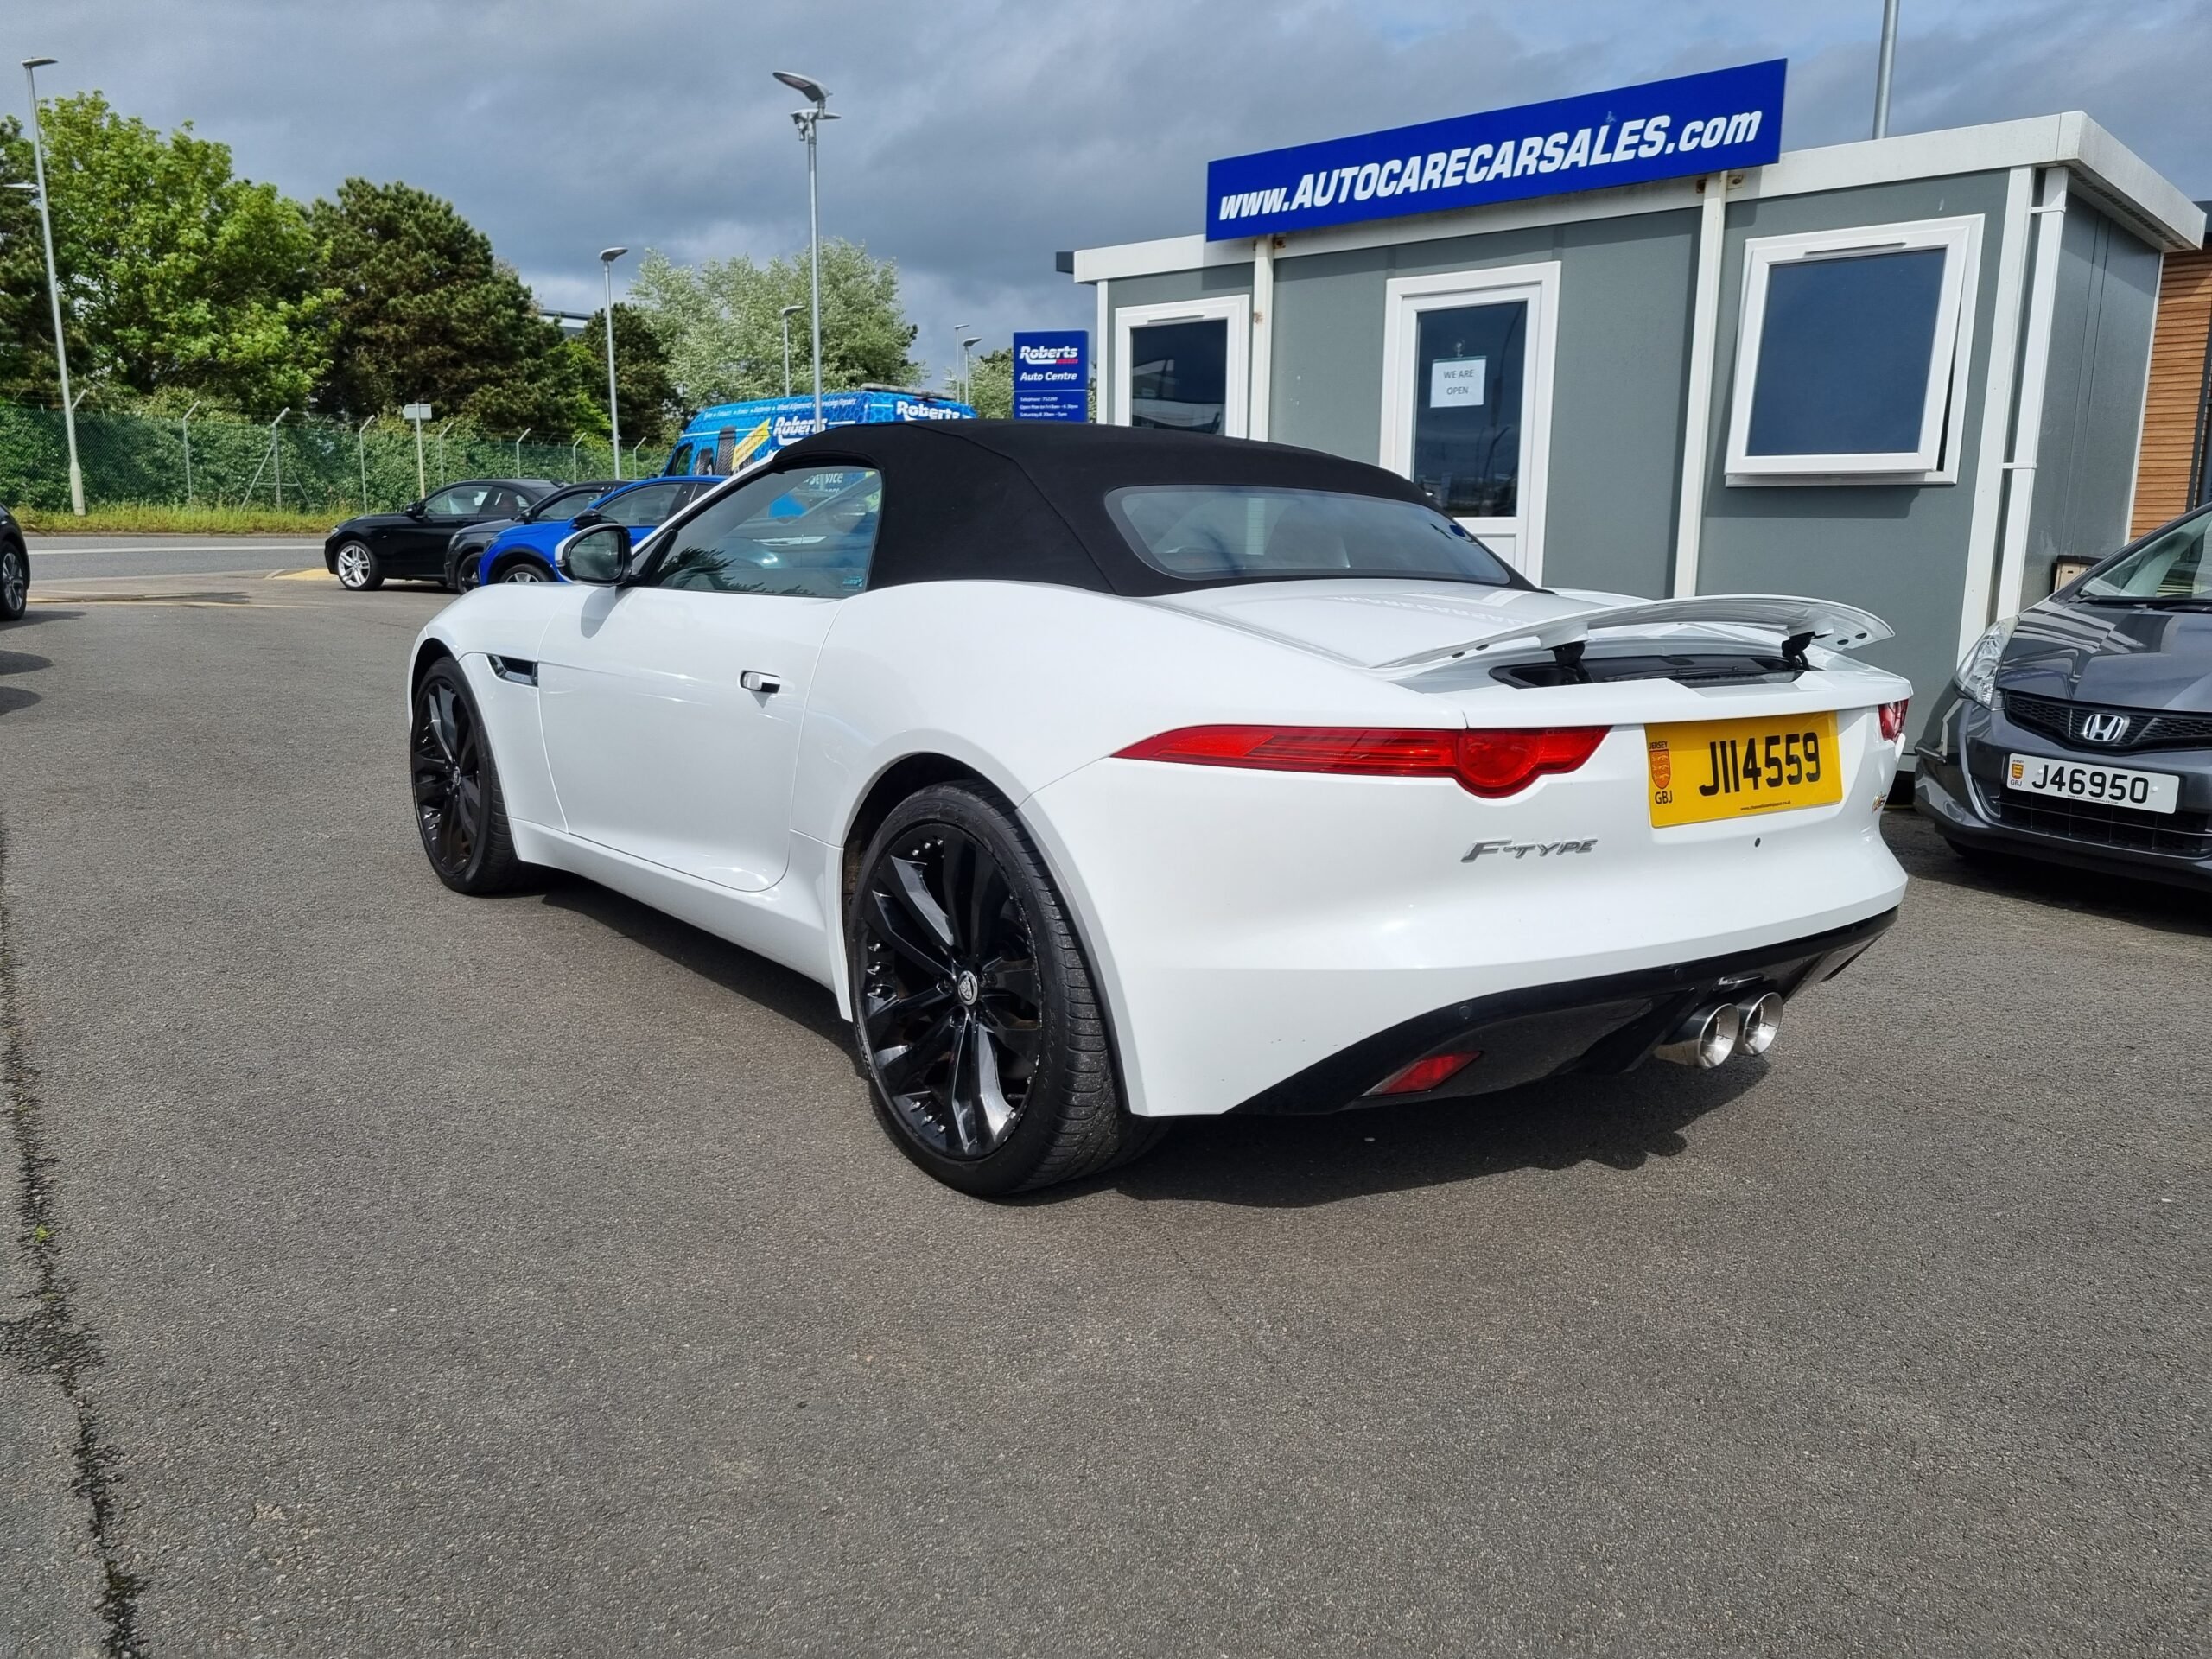 Reduced2014 Jaguar F Type S 30 V6 375bhp Quickshift Automatic Only 6300 Milesconvertiblevery Nice Examplenow Only 29995 8